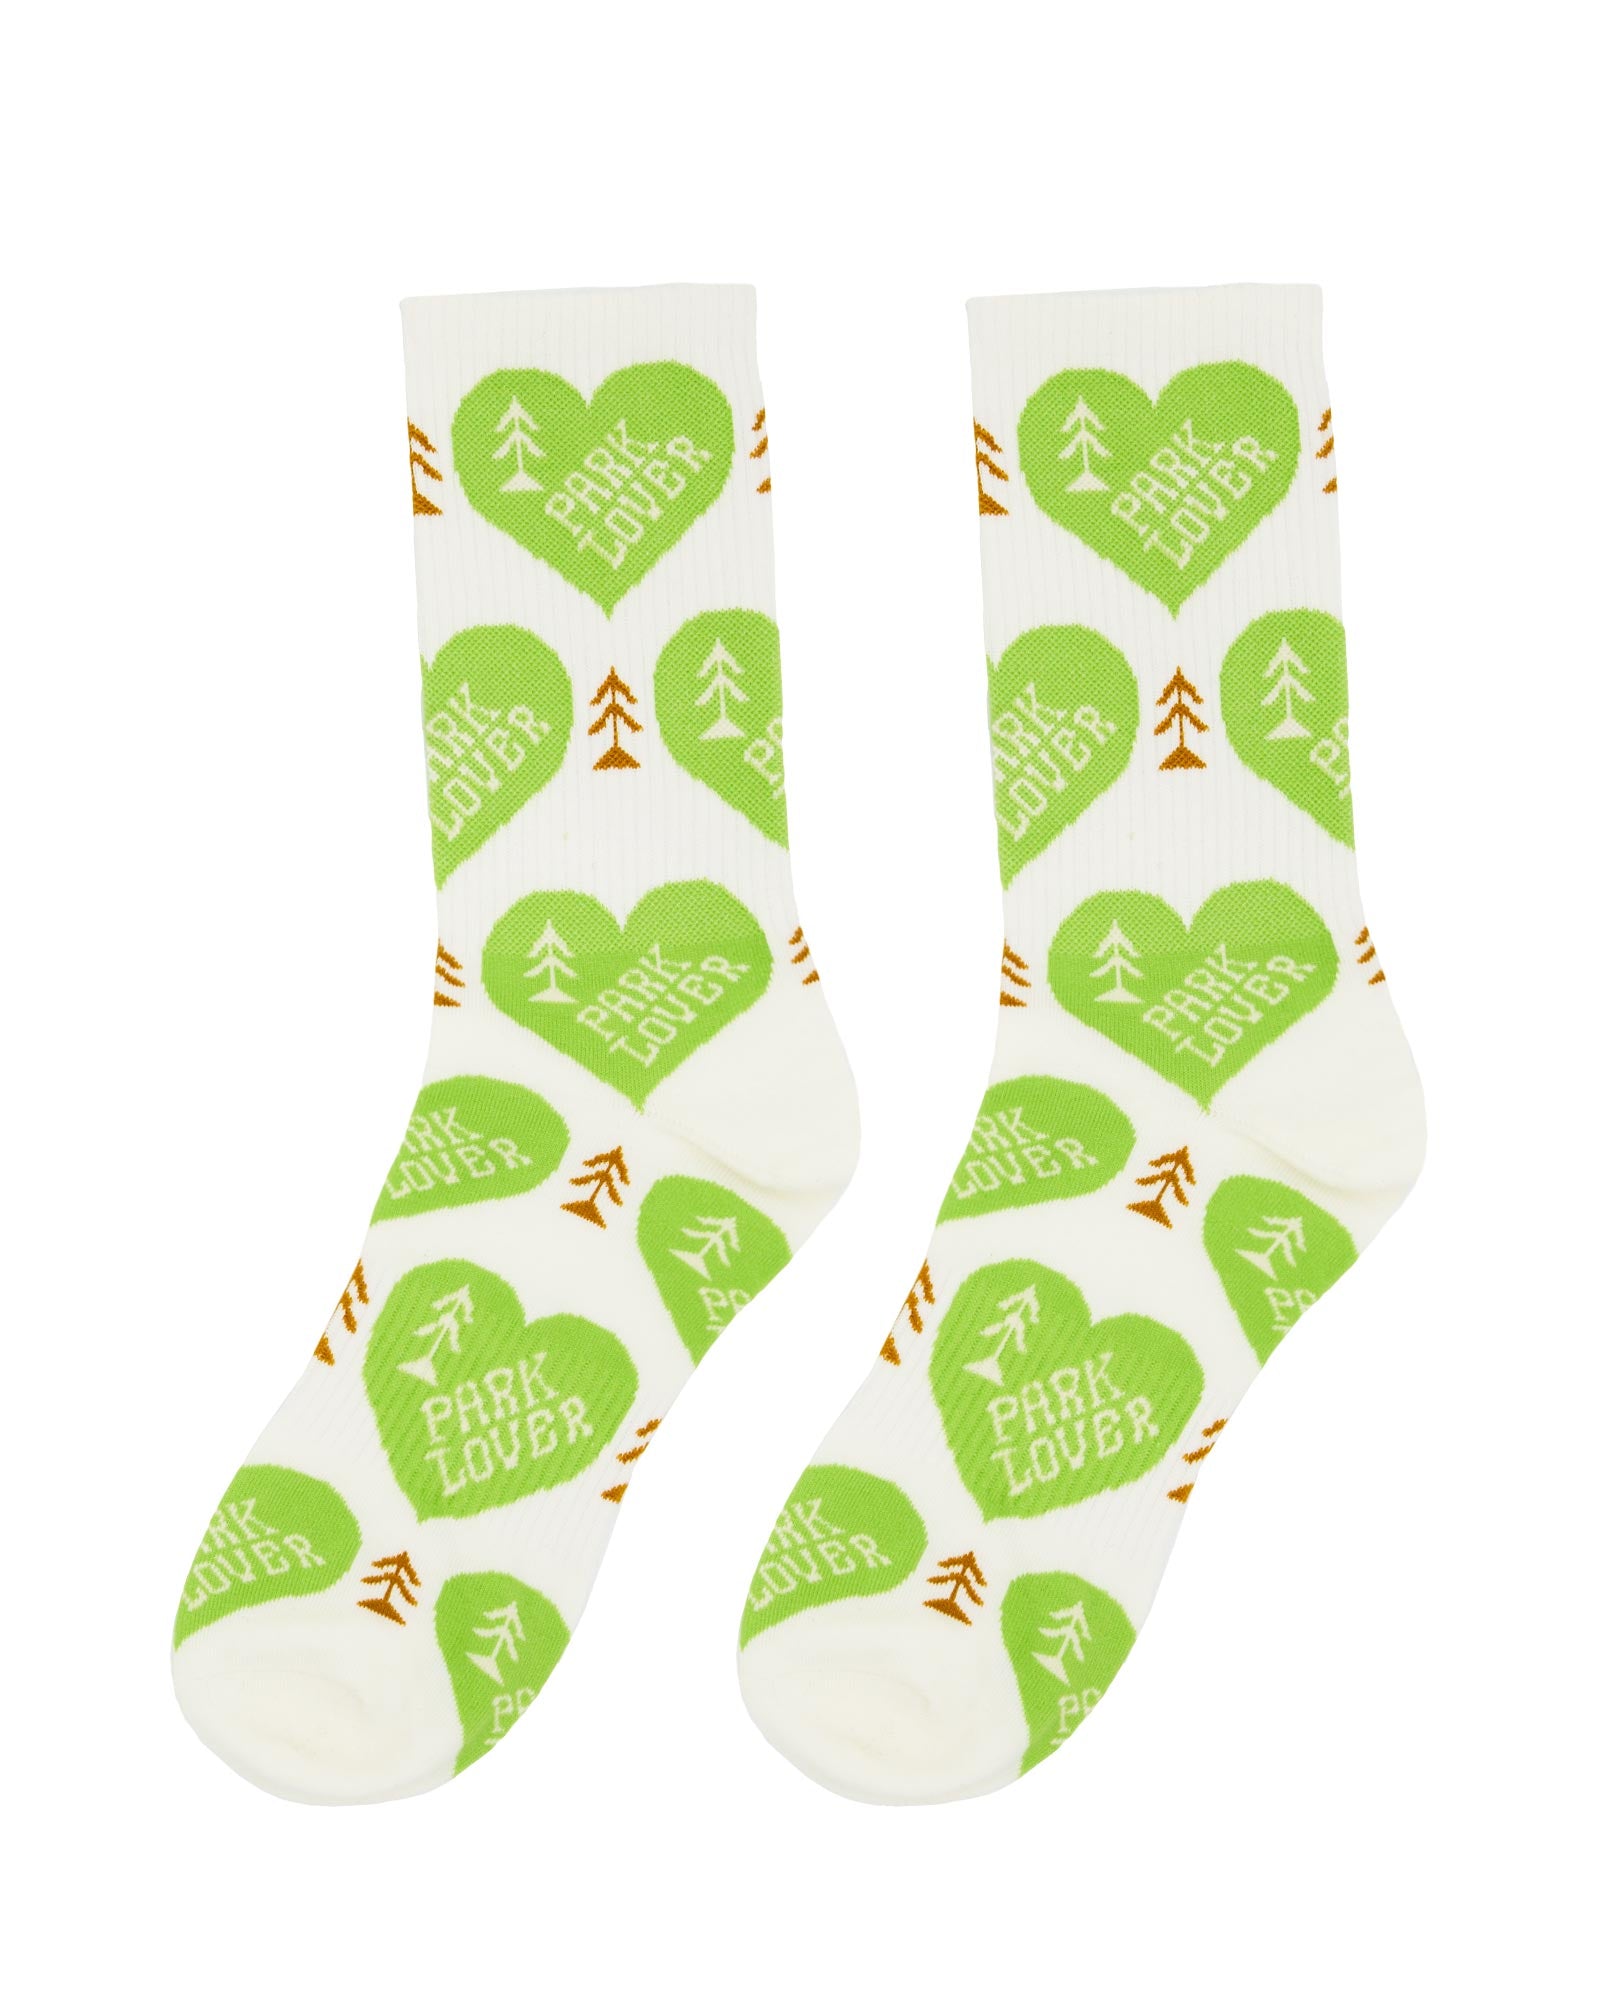 White socks with green hearts that say 